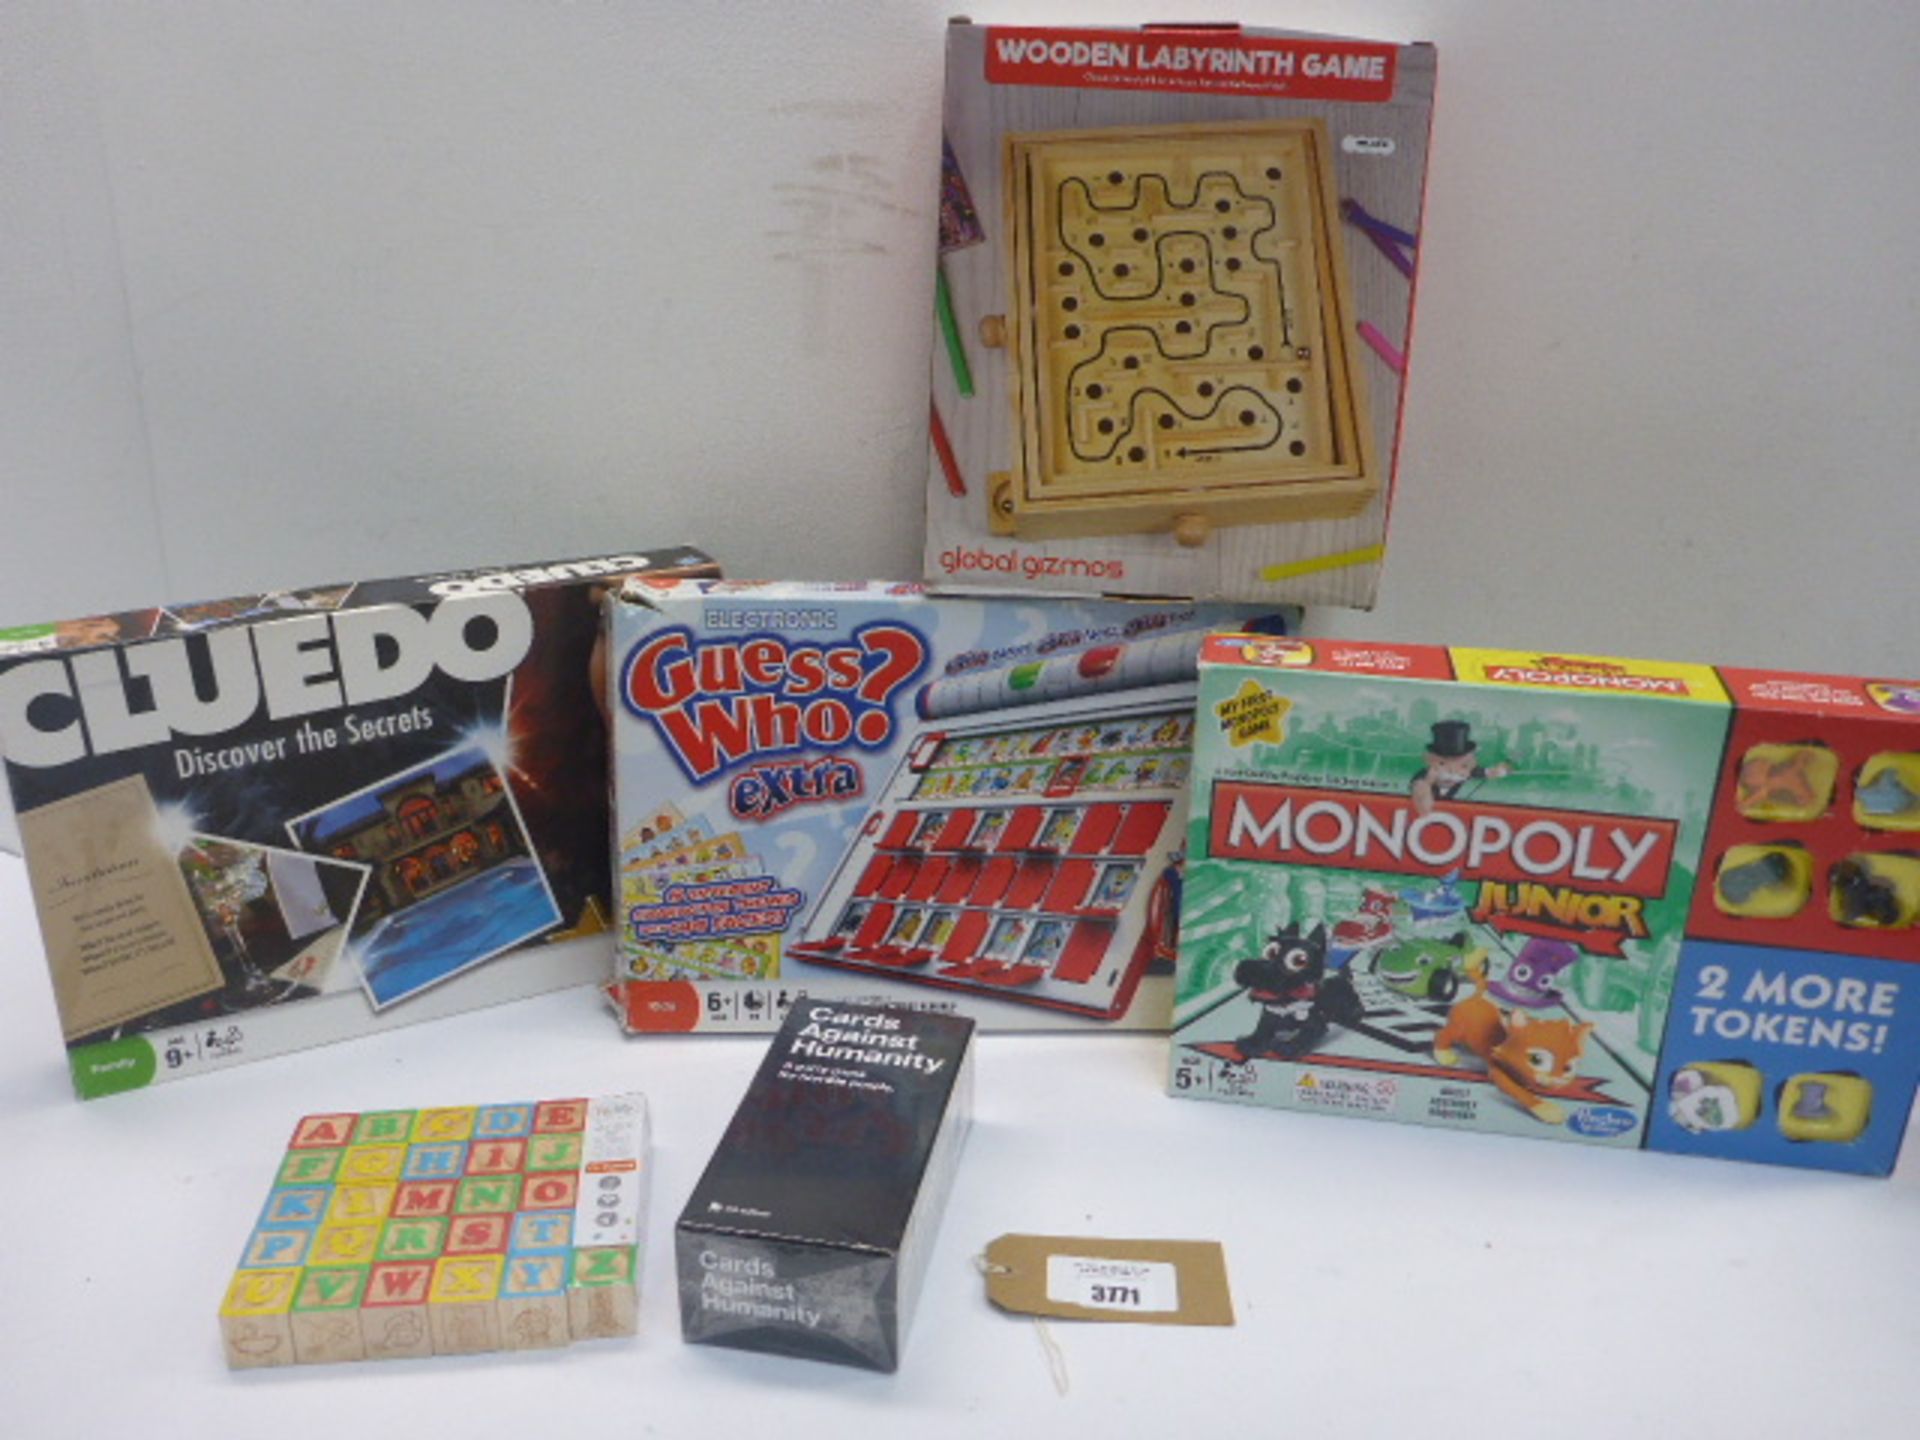 Cludo, Guess Who?, Monopoly Junior, Labyrinth game, Cards Against Humanity and Wooden blocks